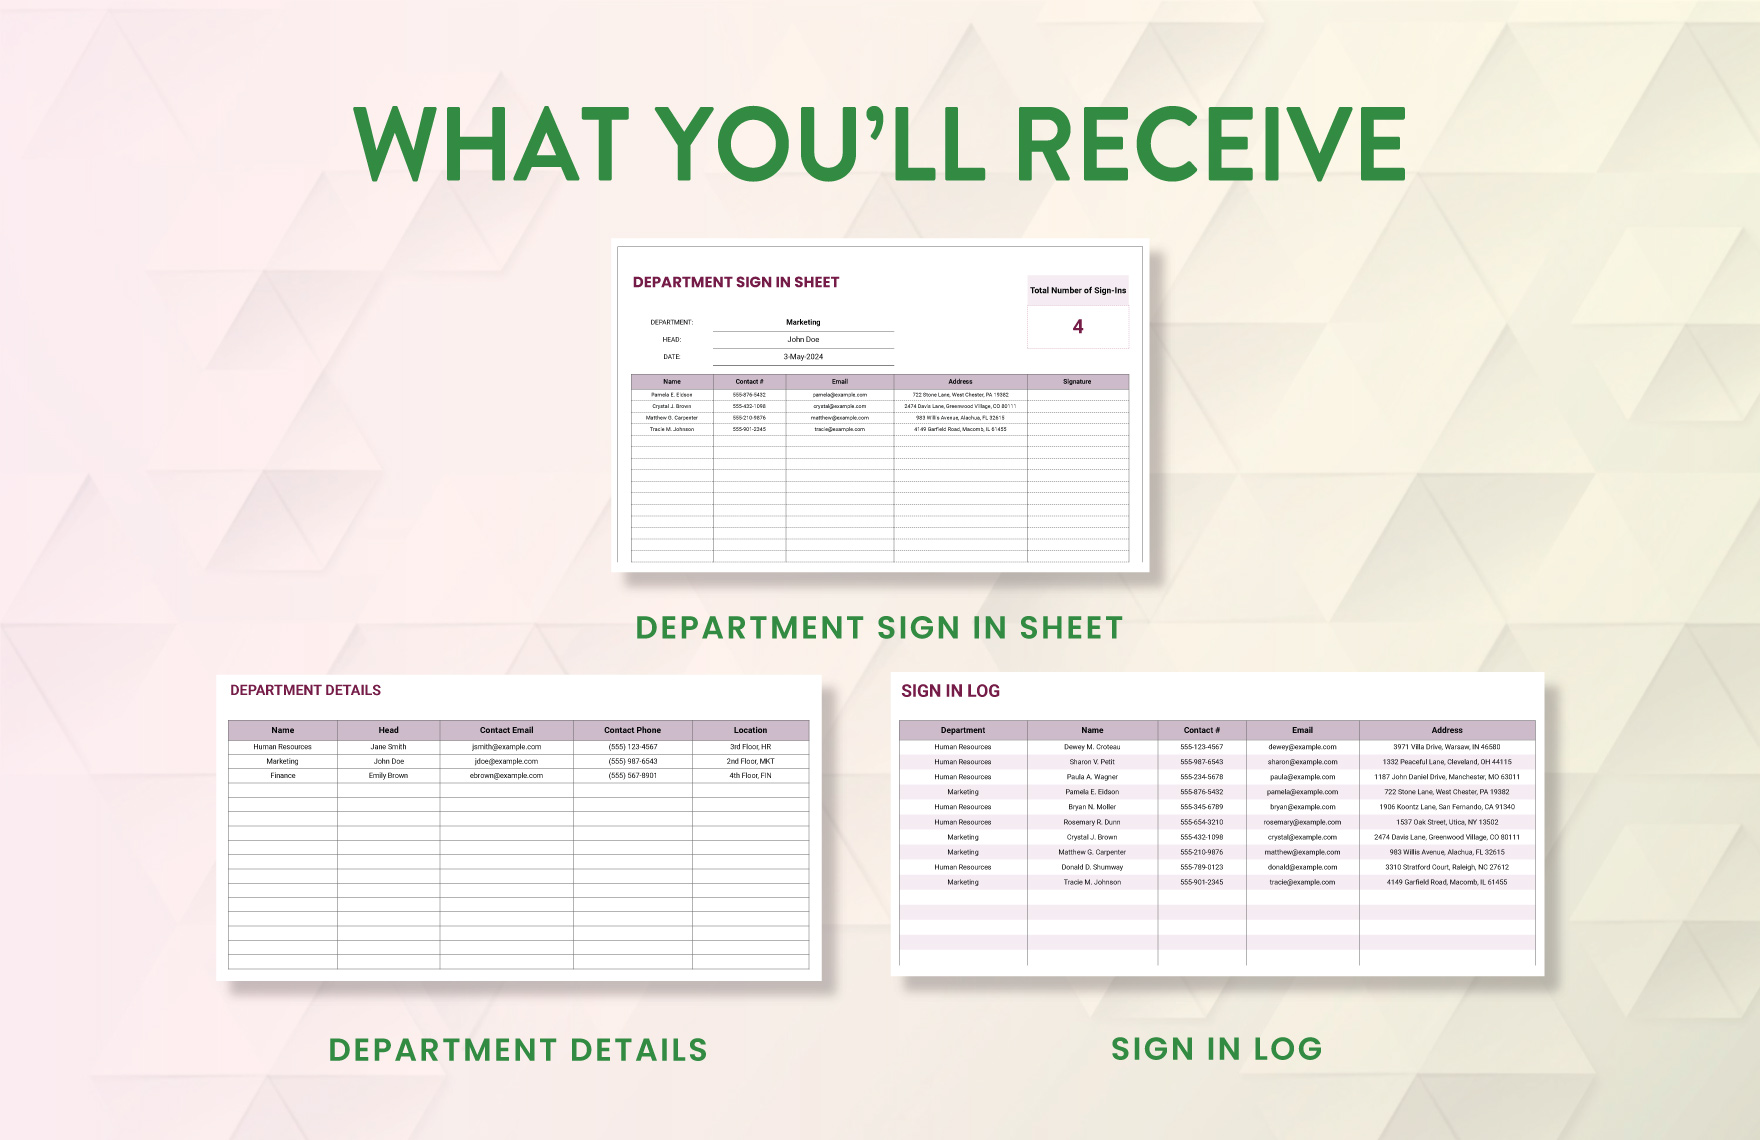 Department Sign in Sheet Template